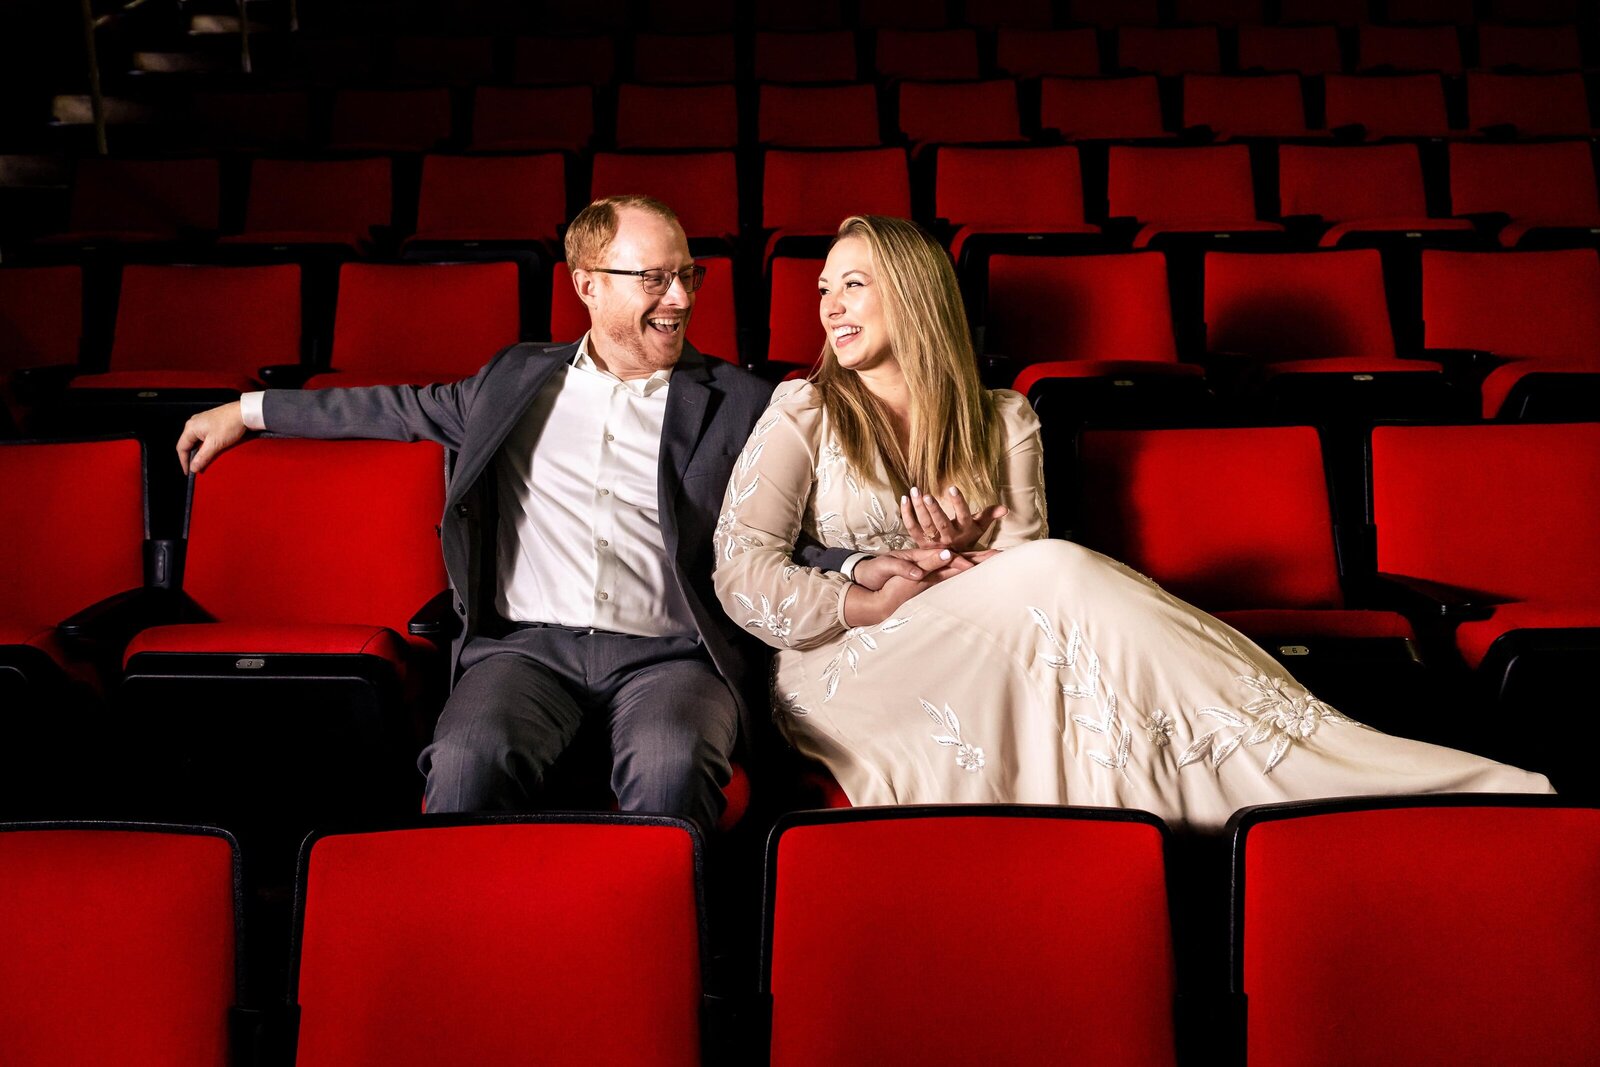 man in a suit and woman in a white dress sit next to one another in a row of red stadium seats